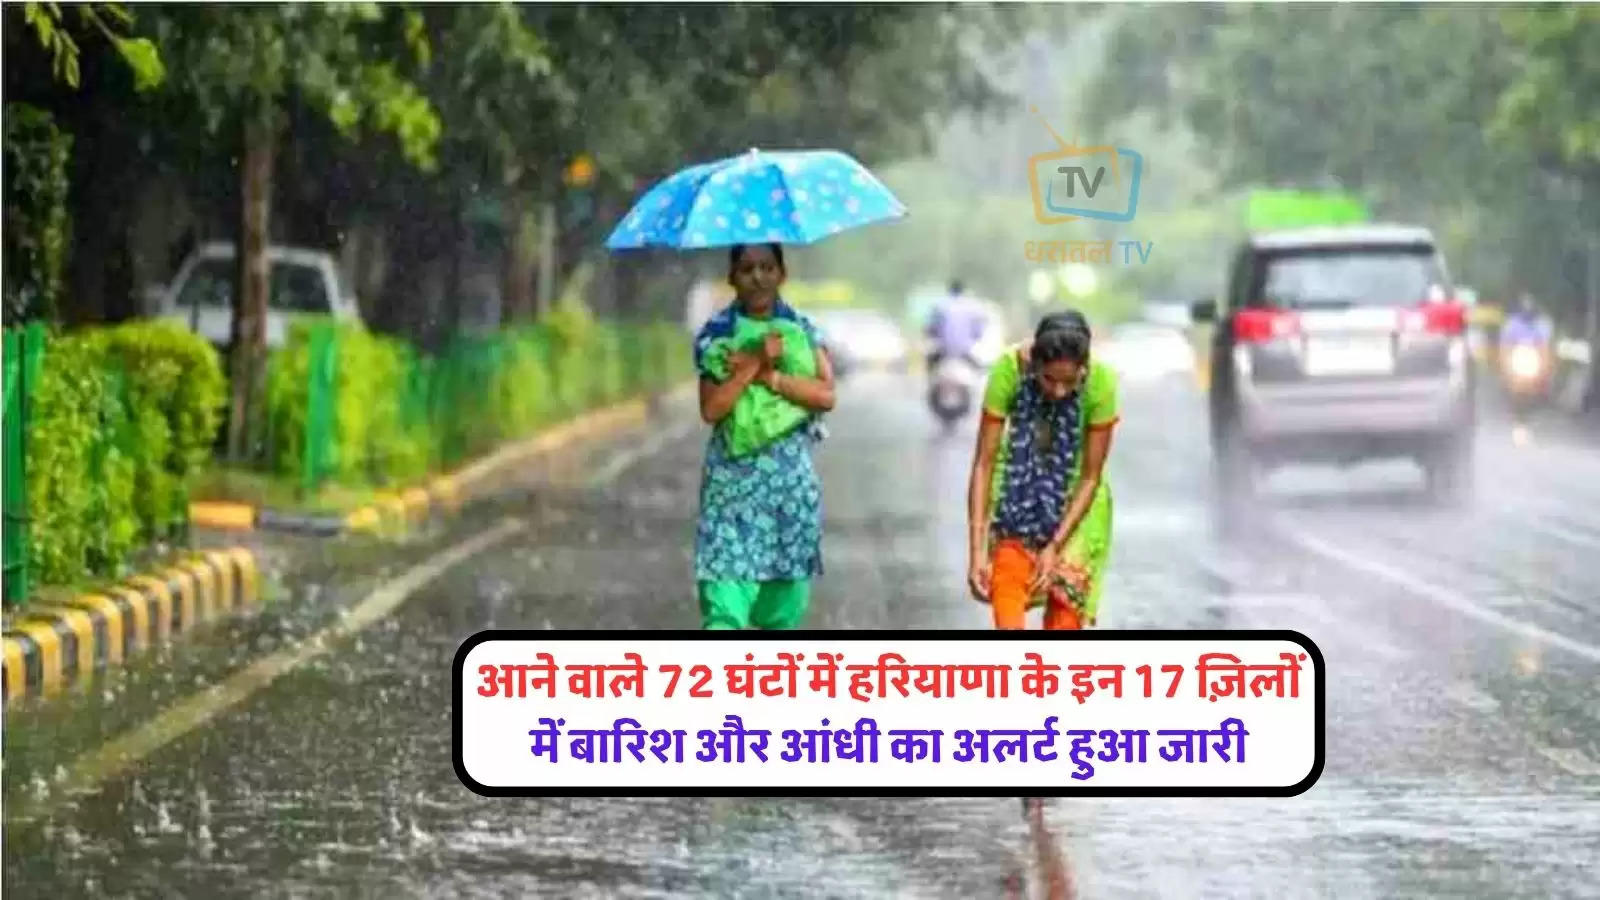 rain-and-thunderstorm-alert-in-17-districts-of-haryana